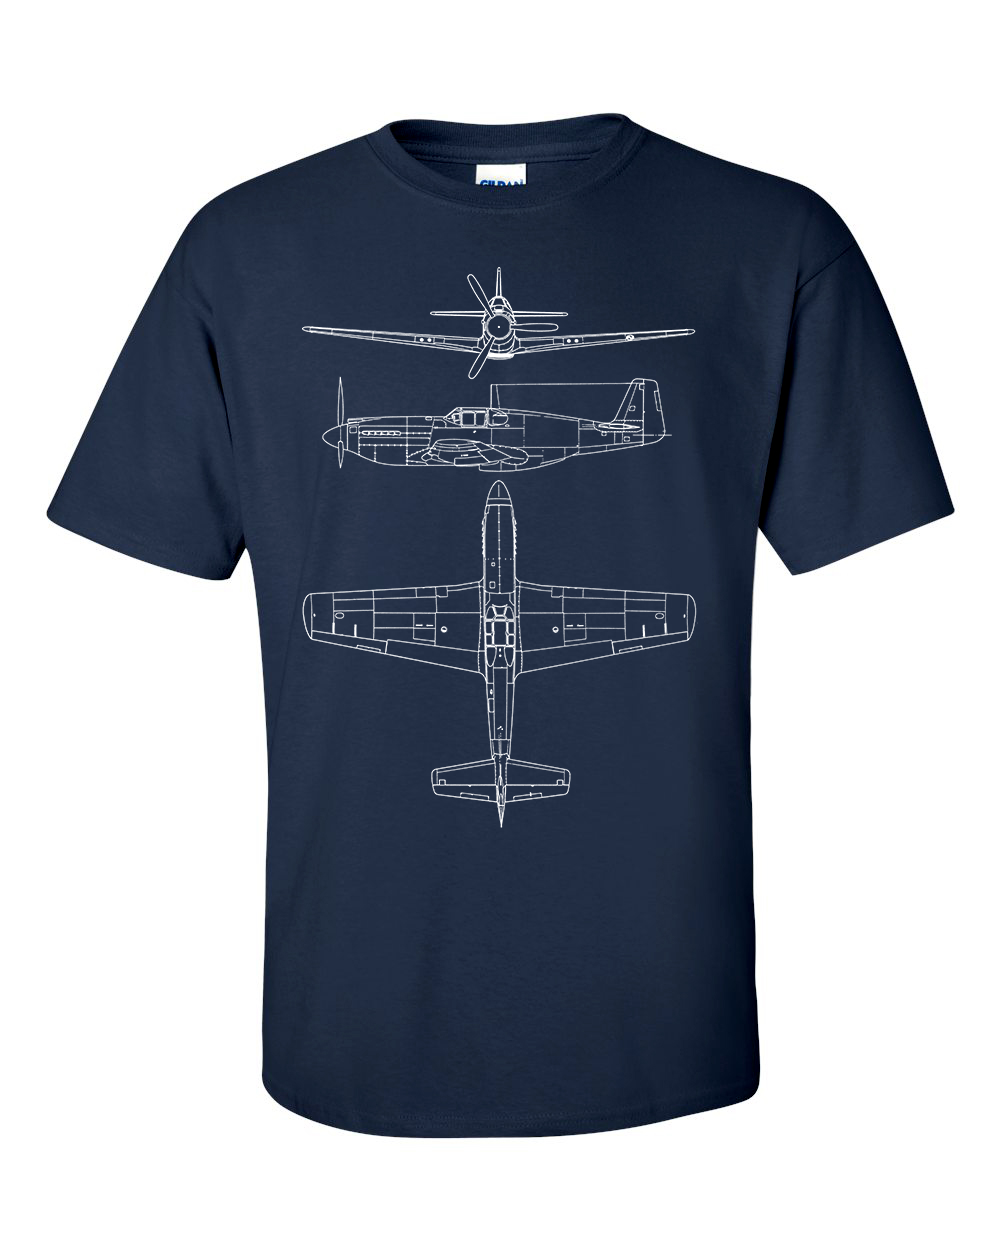 P51 Mustang Fighter Technical Drawing Blueprint USAF WW2 Fighter Aircraft T-Shirt